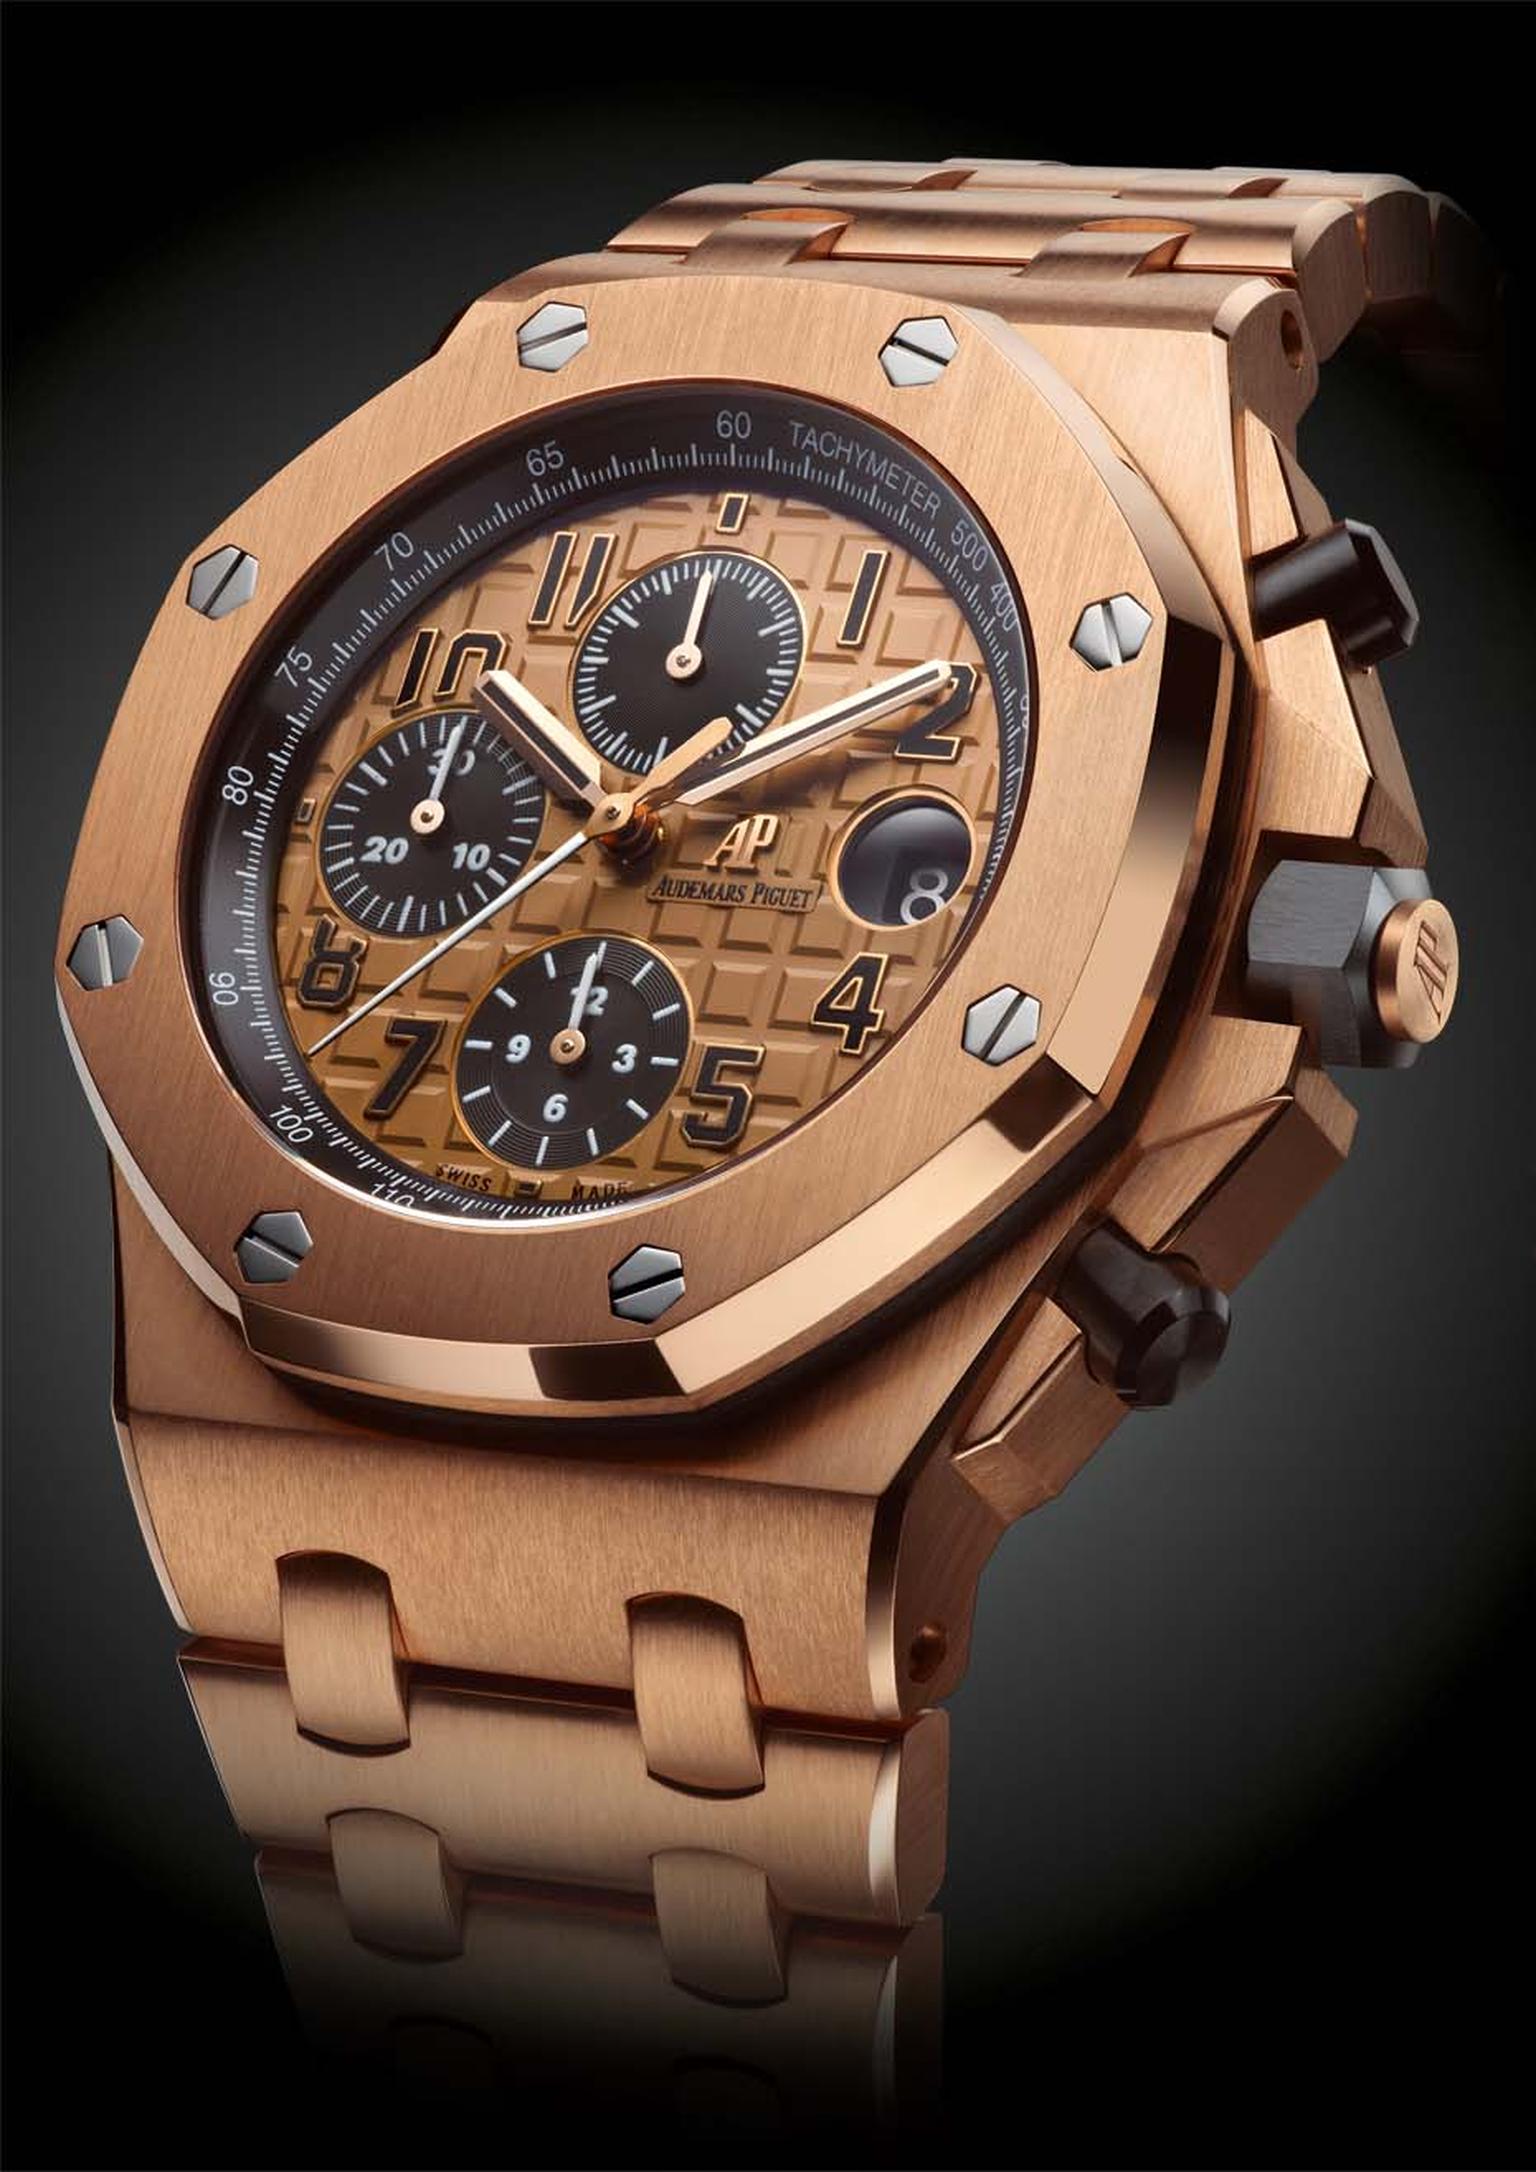 Audemars Piguet Royal Oak Offshore chronograph watch in pink gold with a 'Méga Tapisserie' pattern dial and pink gold bracelet (£50,400).